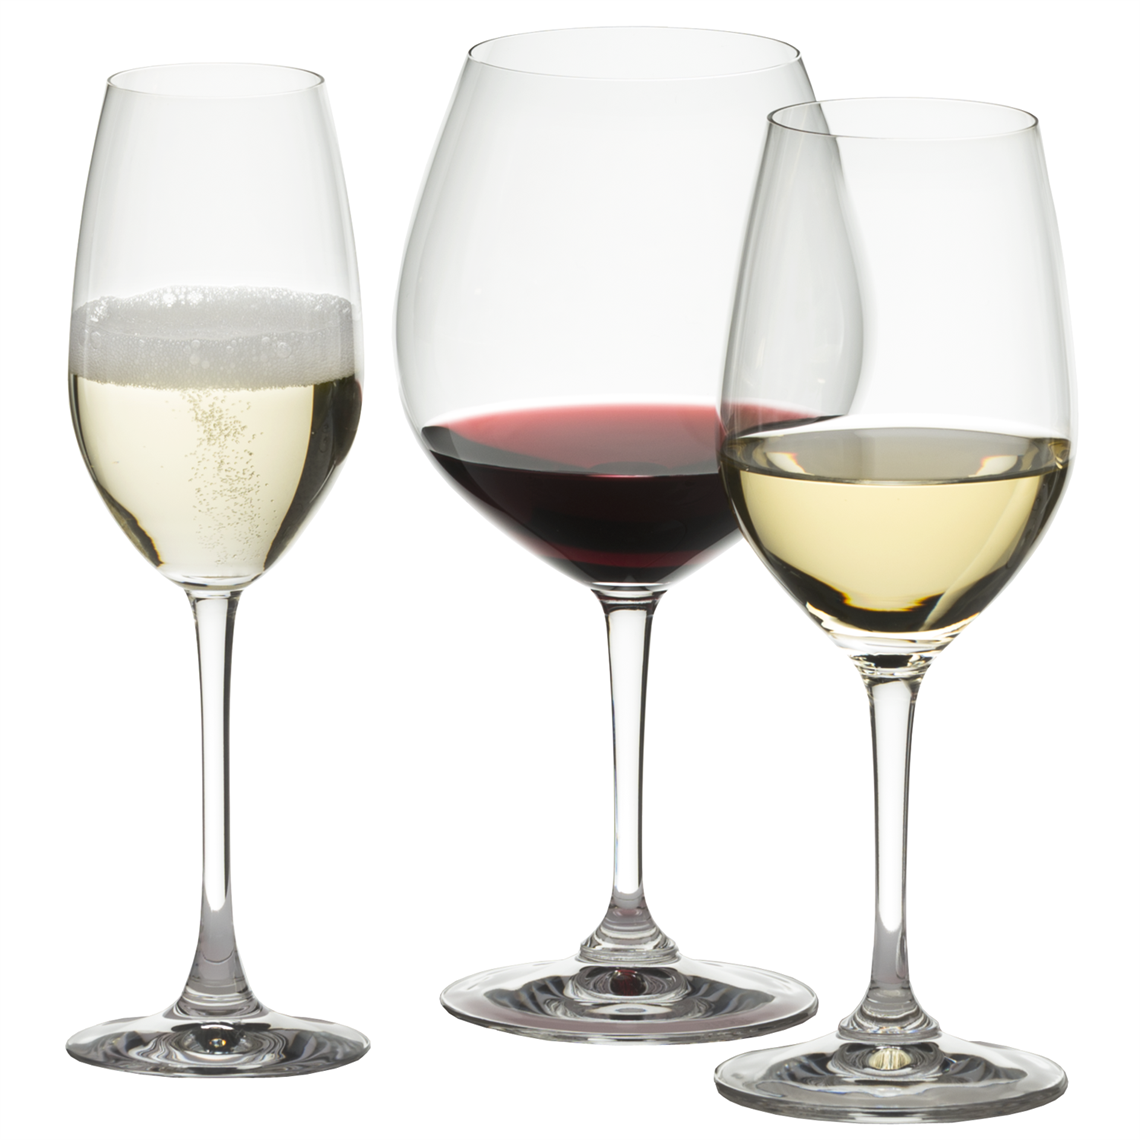 View more schott zwiesel from our Restaurant & Trade Glasses range